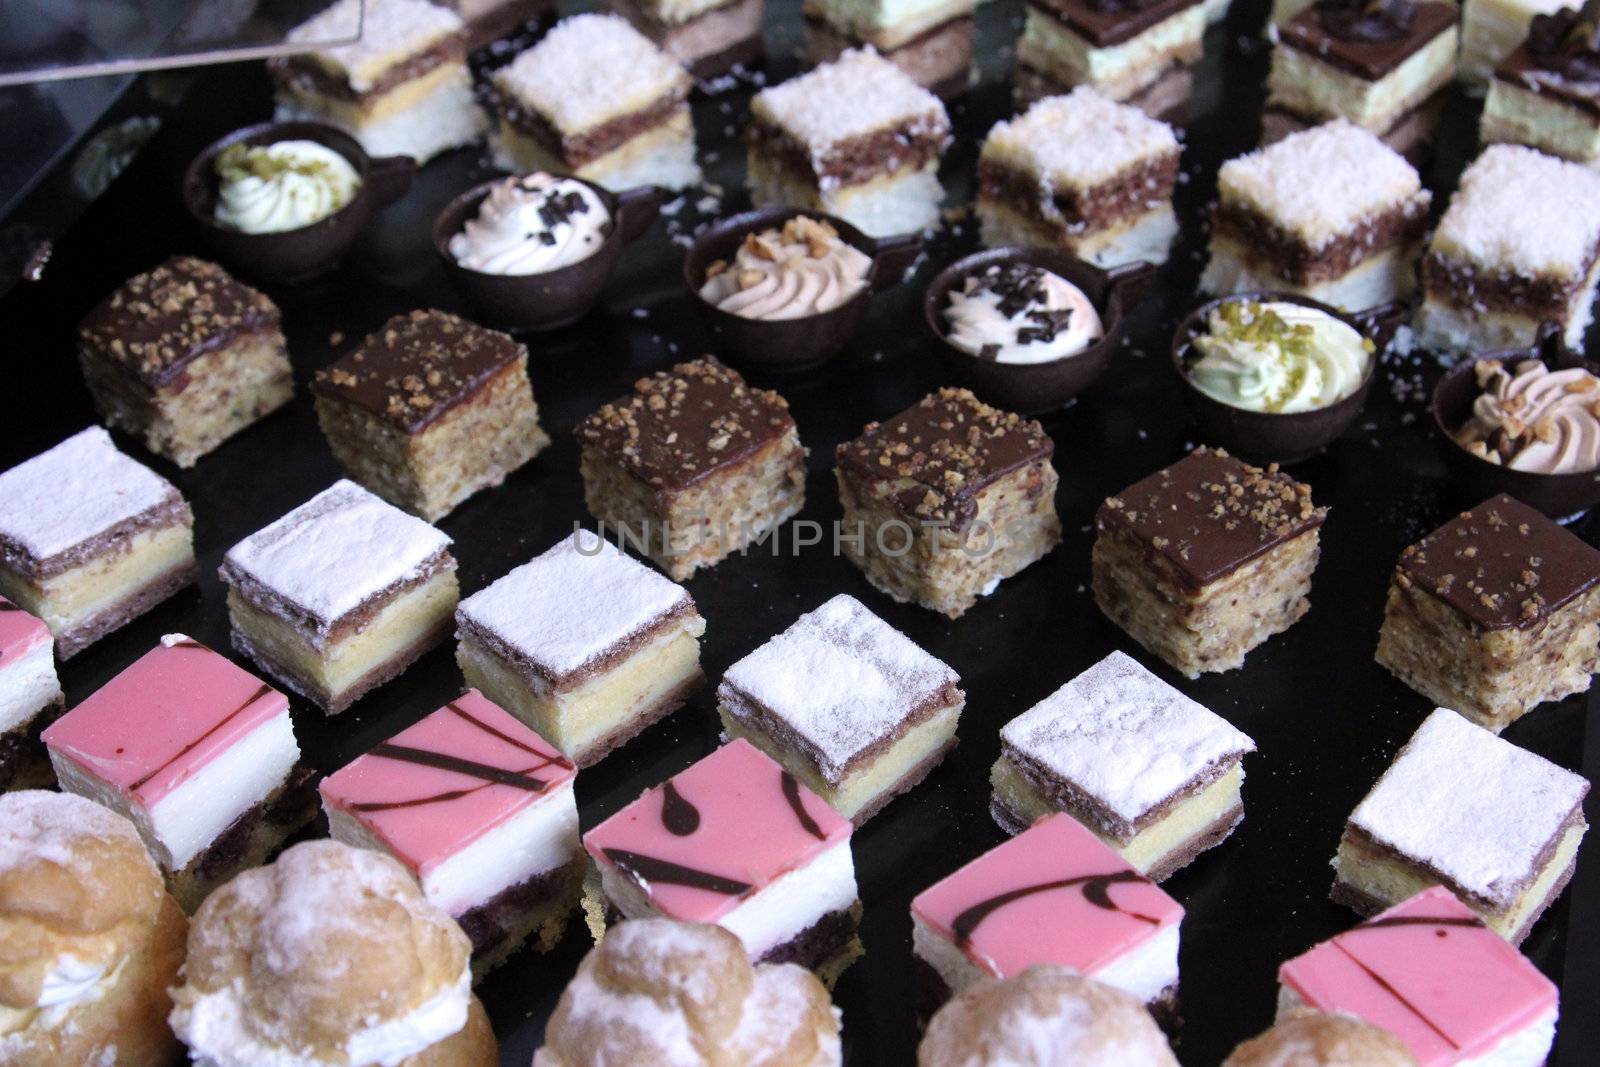 Colorful desserts and pastry served on a wedding party